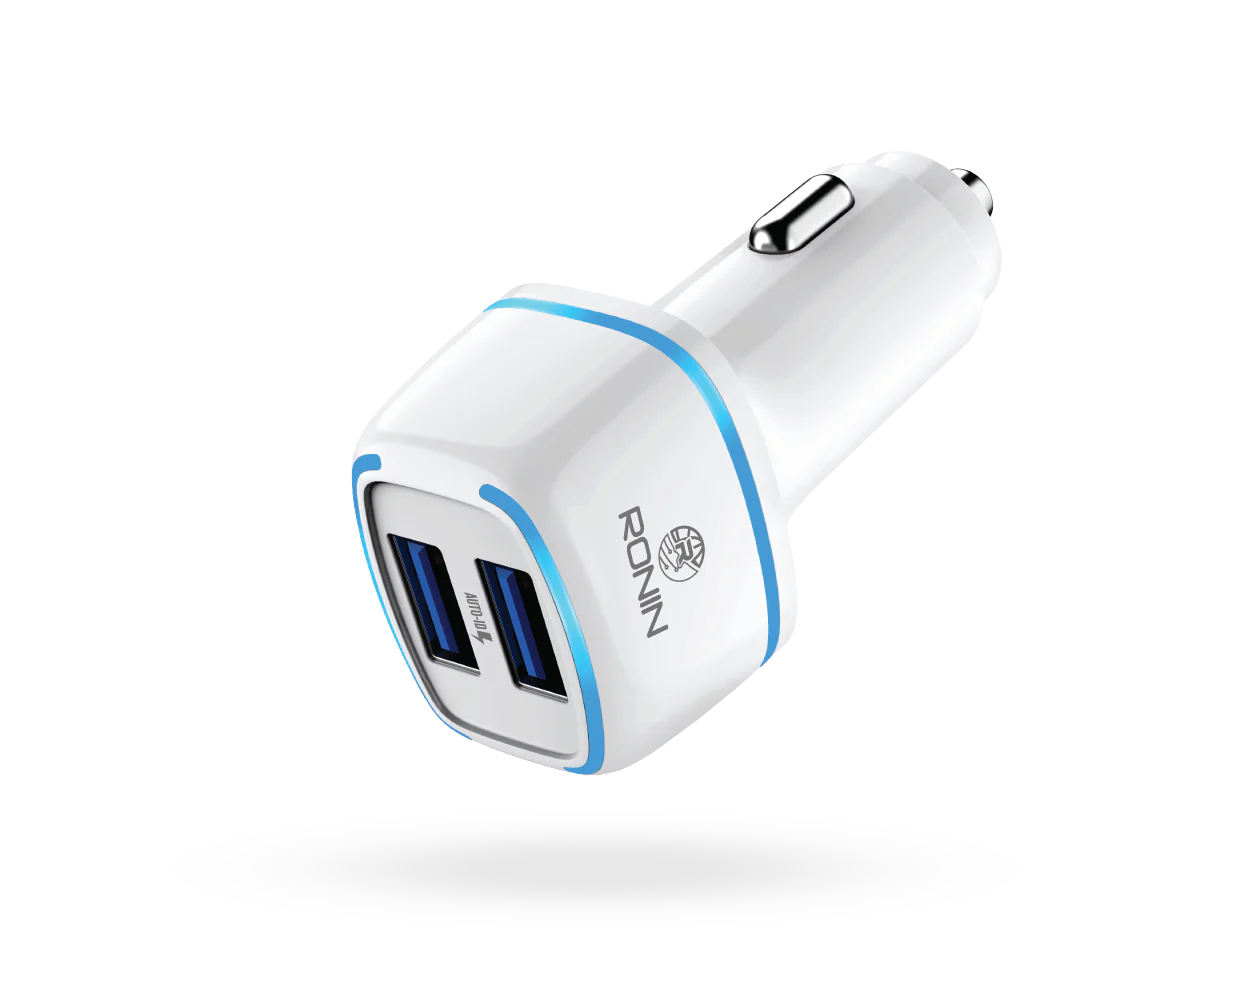 Ronin R445 Car charger 2.4 ampere with 2 USB Charging Ports and Luminous LED